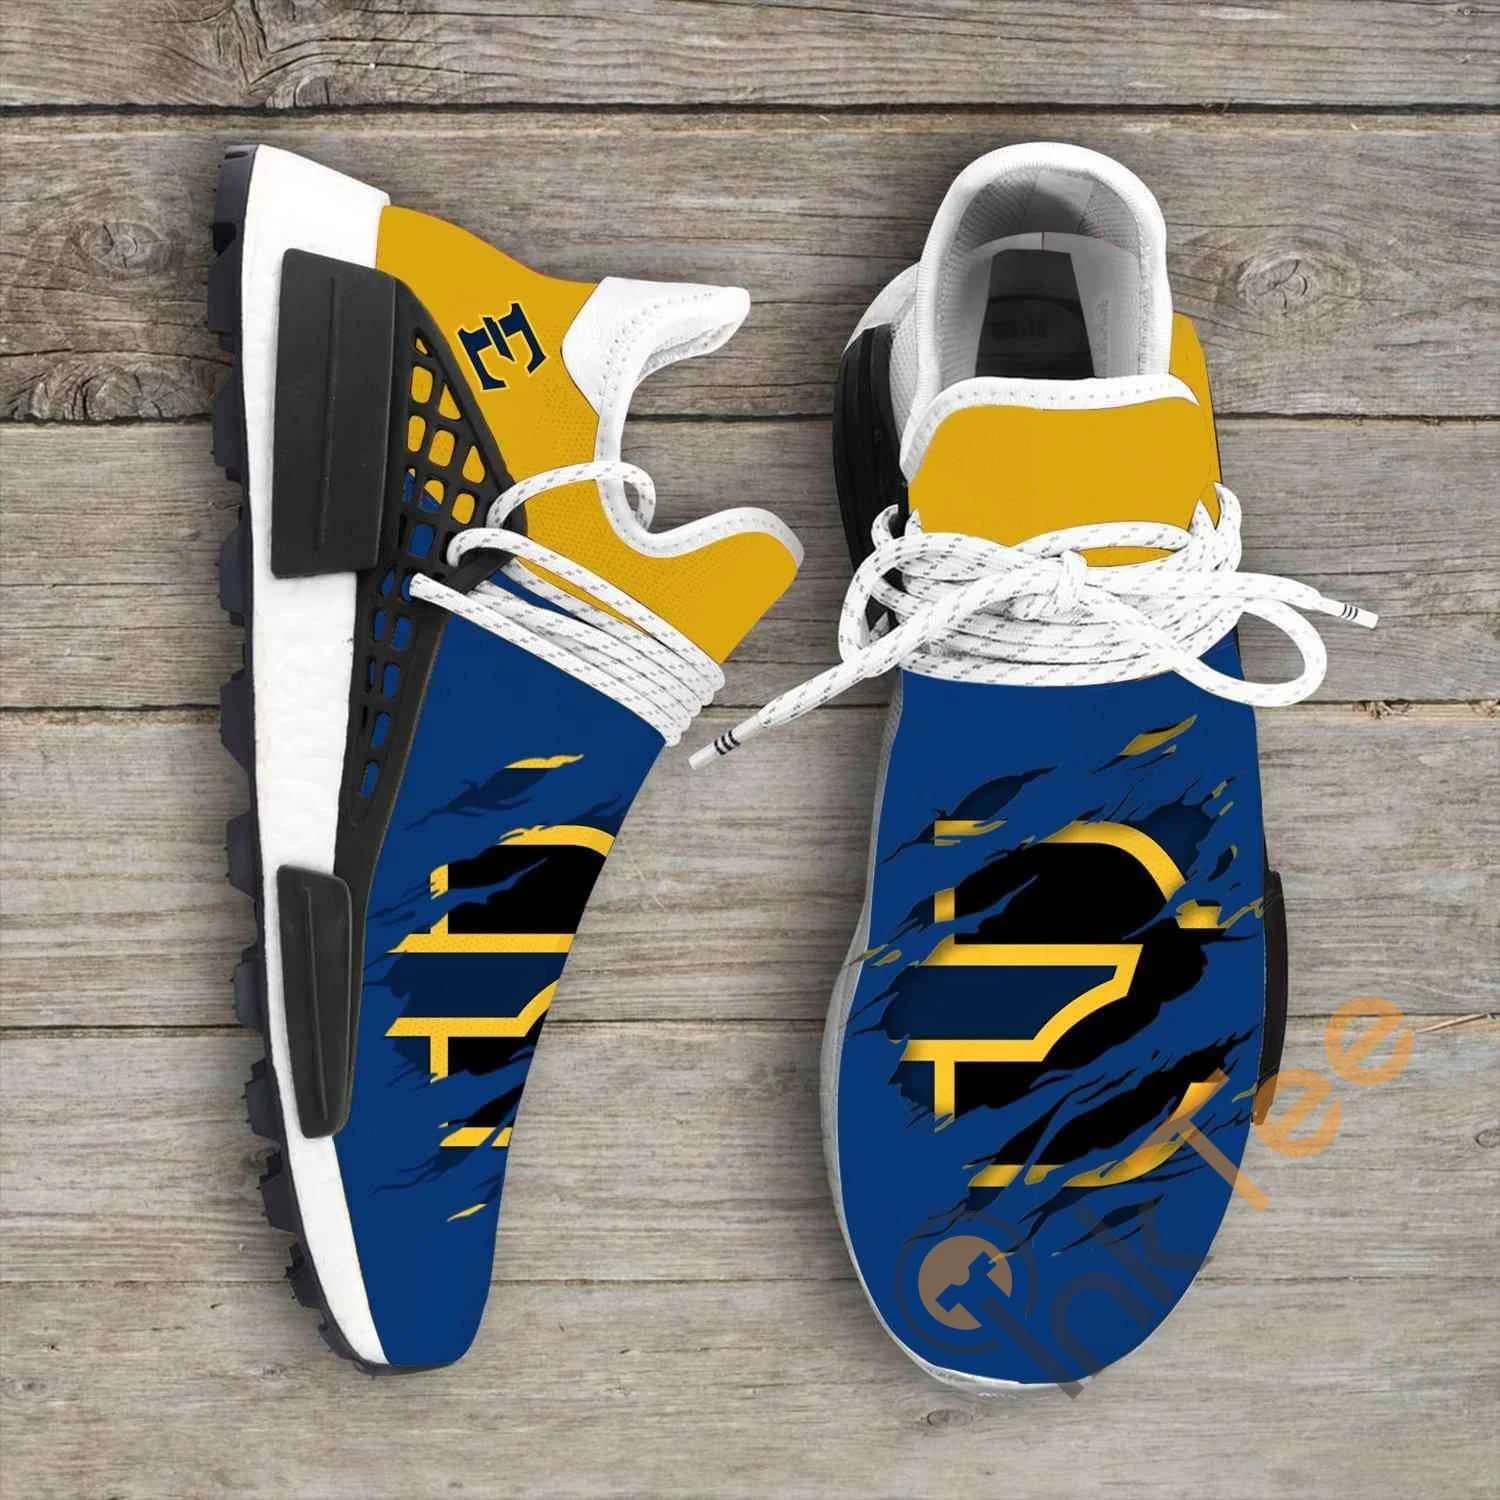 East Tennessee State Buccaneers Ncaa NMD Human Shoes